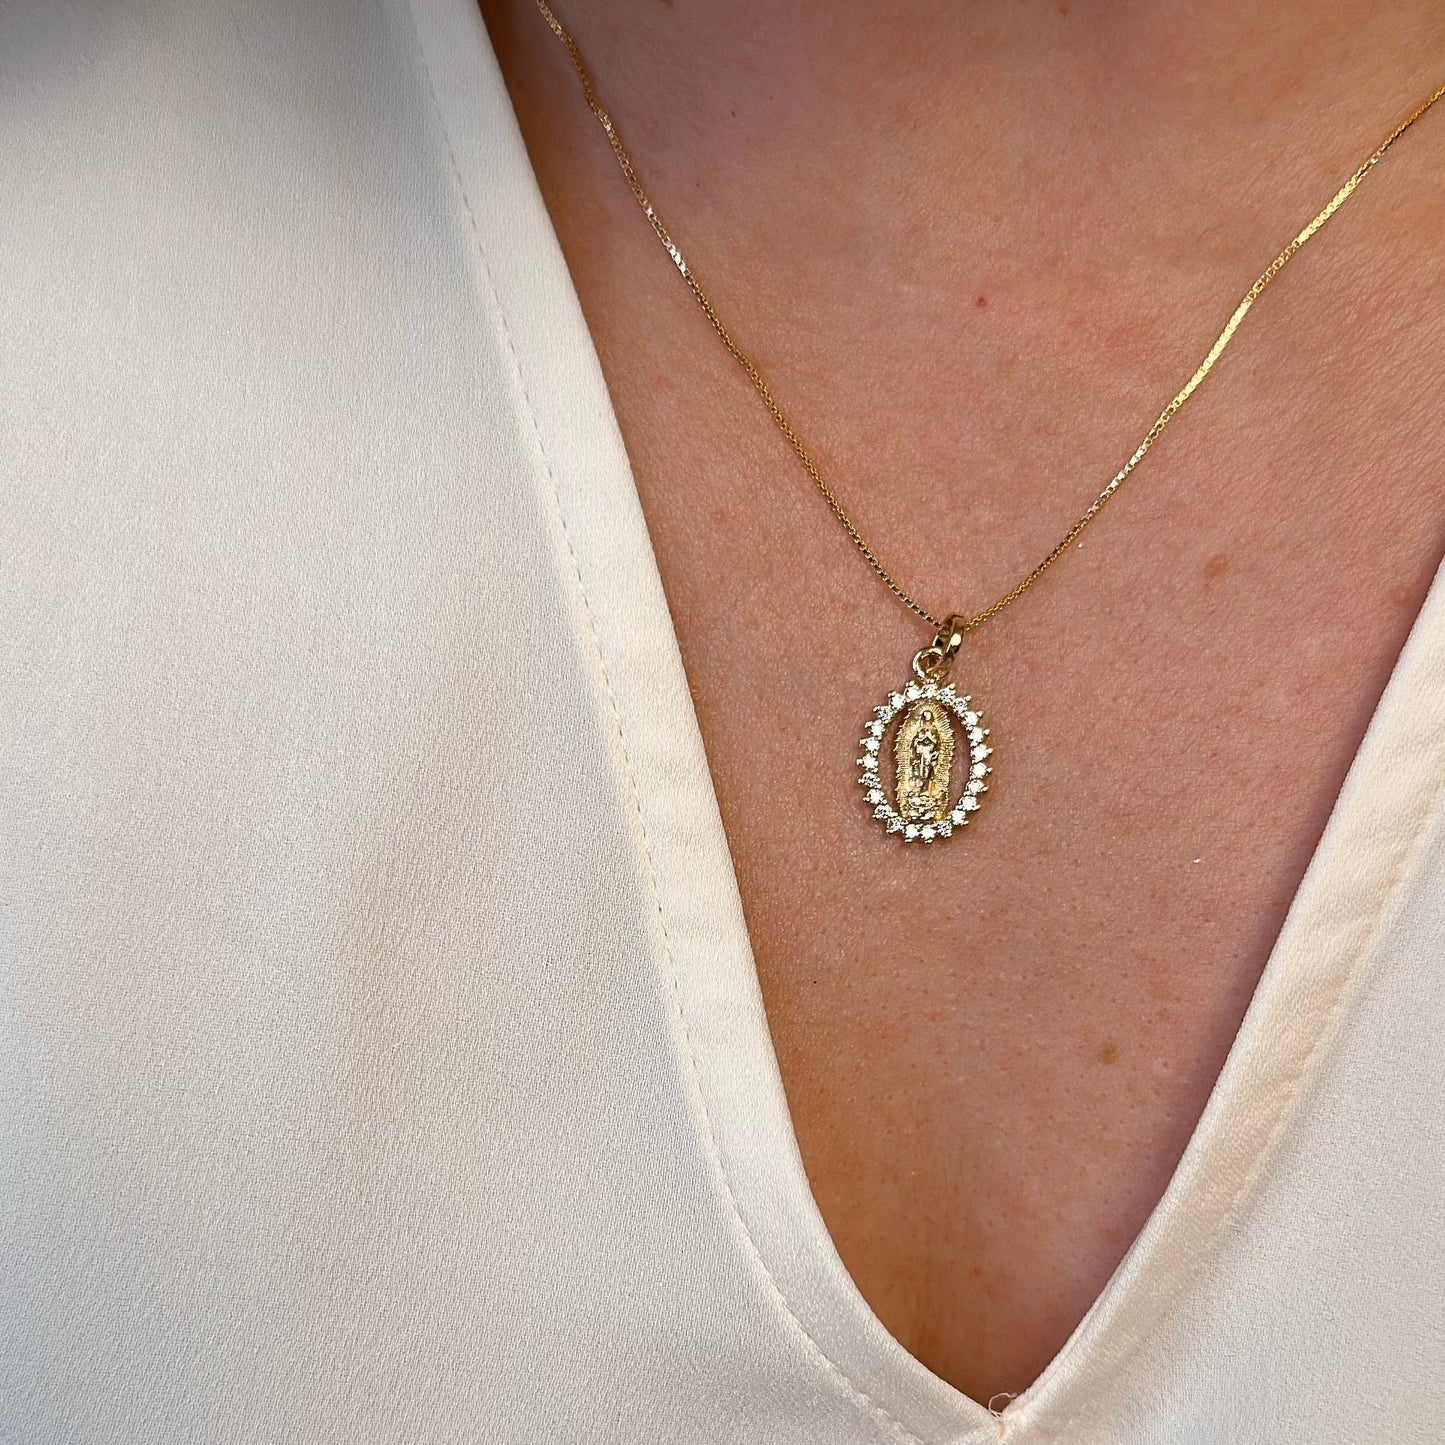 Our Lady of Guadalupe Medal Gold Filled Dainty Chain Necklace